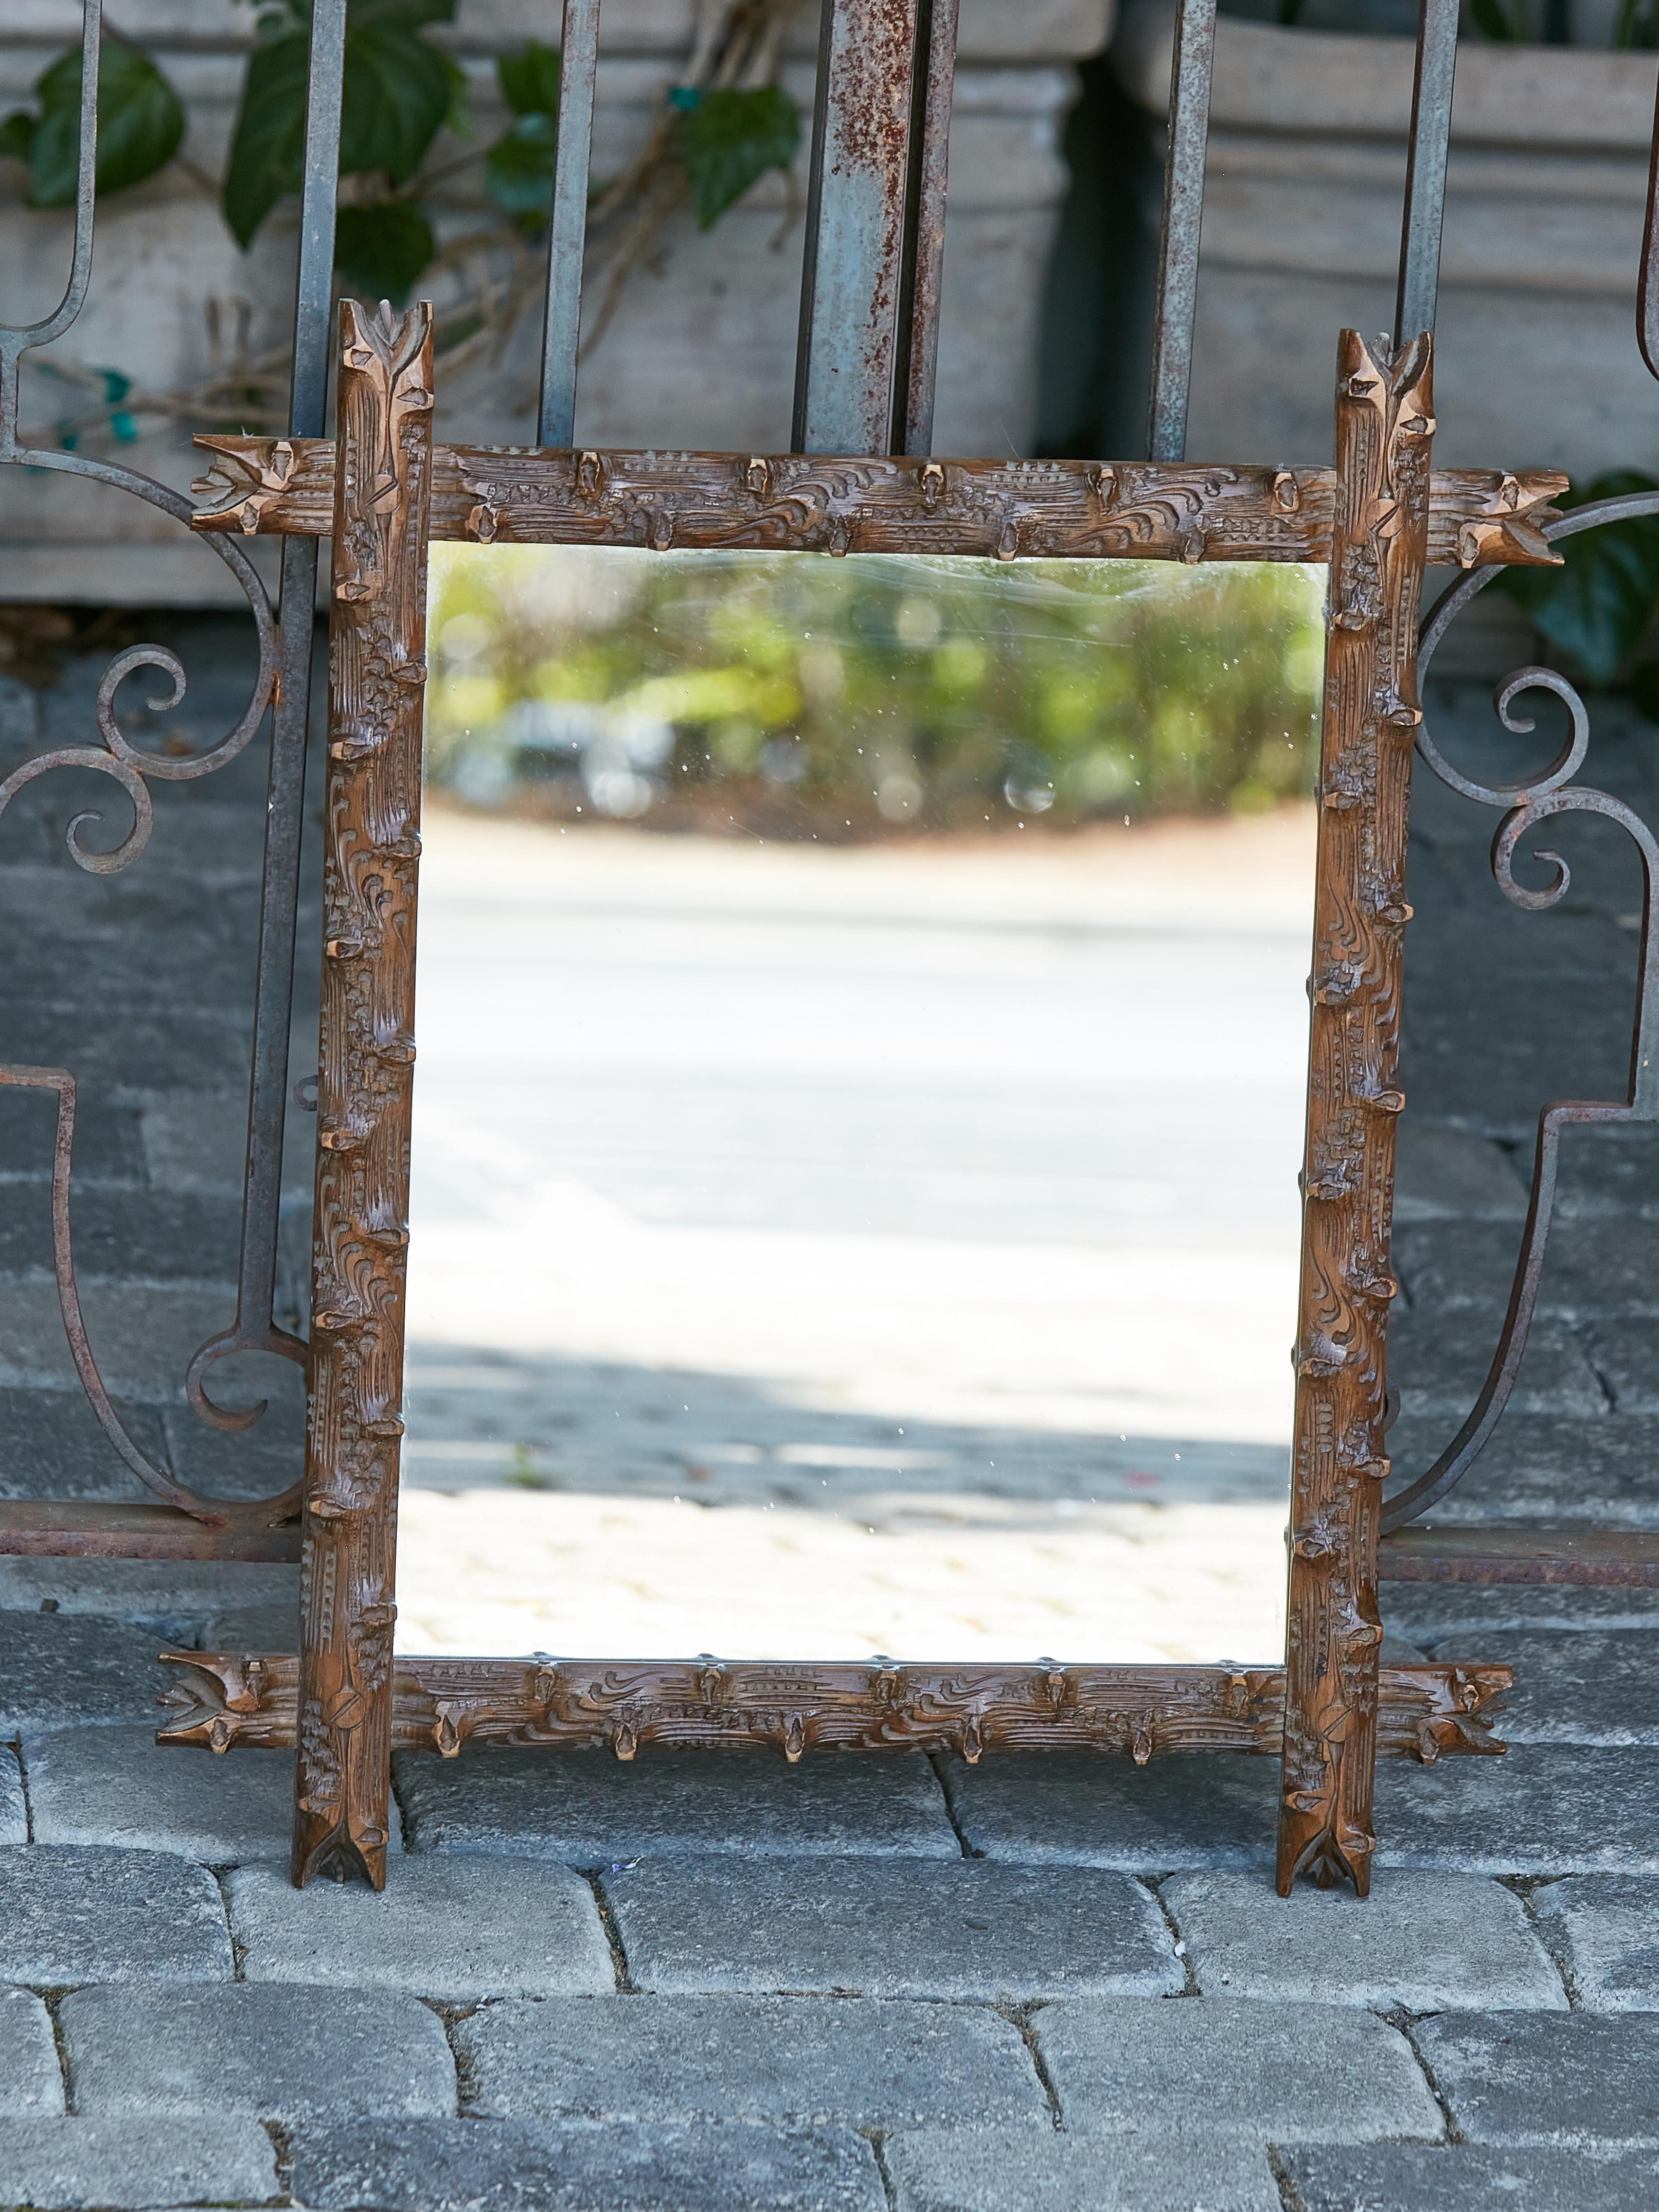 A Black Forest wooden mirror from the 19th century with hand-carved wooden frame inspired by tree branches. This charming 19th-century Black Forest wooden mirror is akin to a window into a sylvan fairy tale. With a frame masterfully hand-carved to